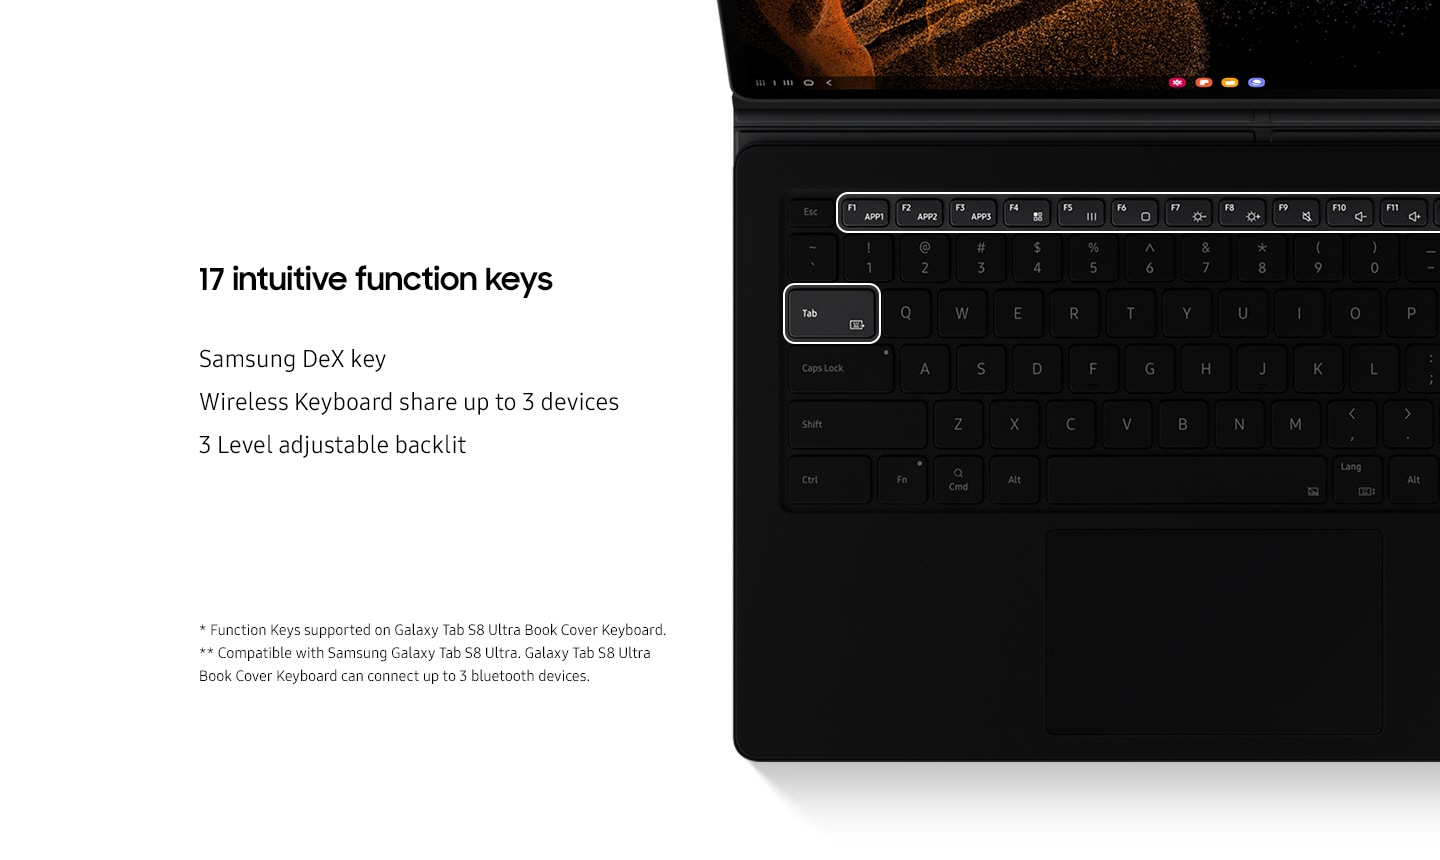 Highlighted 17 intuitive function keys. Align with Samsung DeX key, Wireless Keyboard share up to 3 devices, 3 Level adjustable backlit. And there are several disclaimers. Function Keys supported on Galaxy Tab S8 Ultra Book Cover Keyboard. Compatible with Samsung Galaxy Tab S8 Ultra. Galaxy Tab S8 Ultra Book Cover Keyboard can connect up to 3 bluetooth devices.